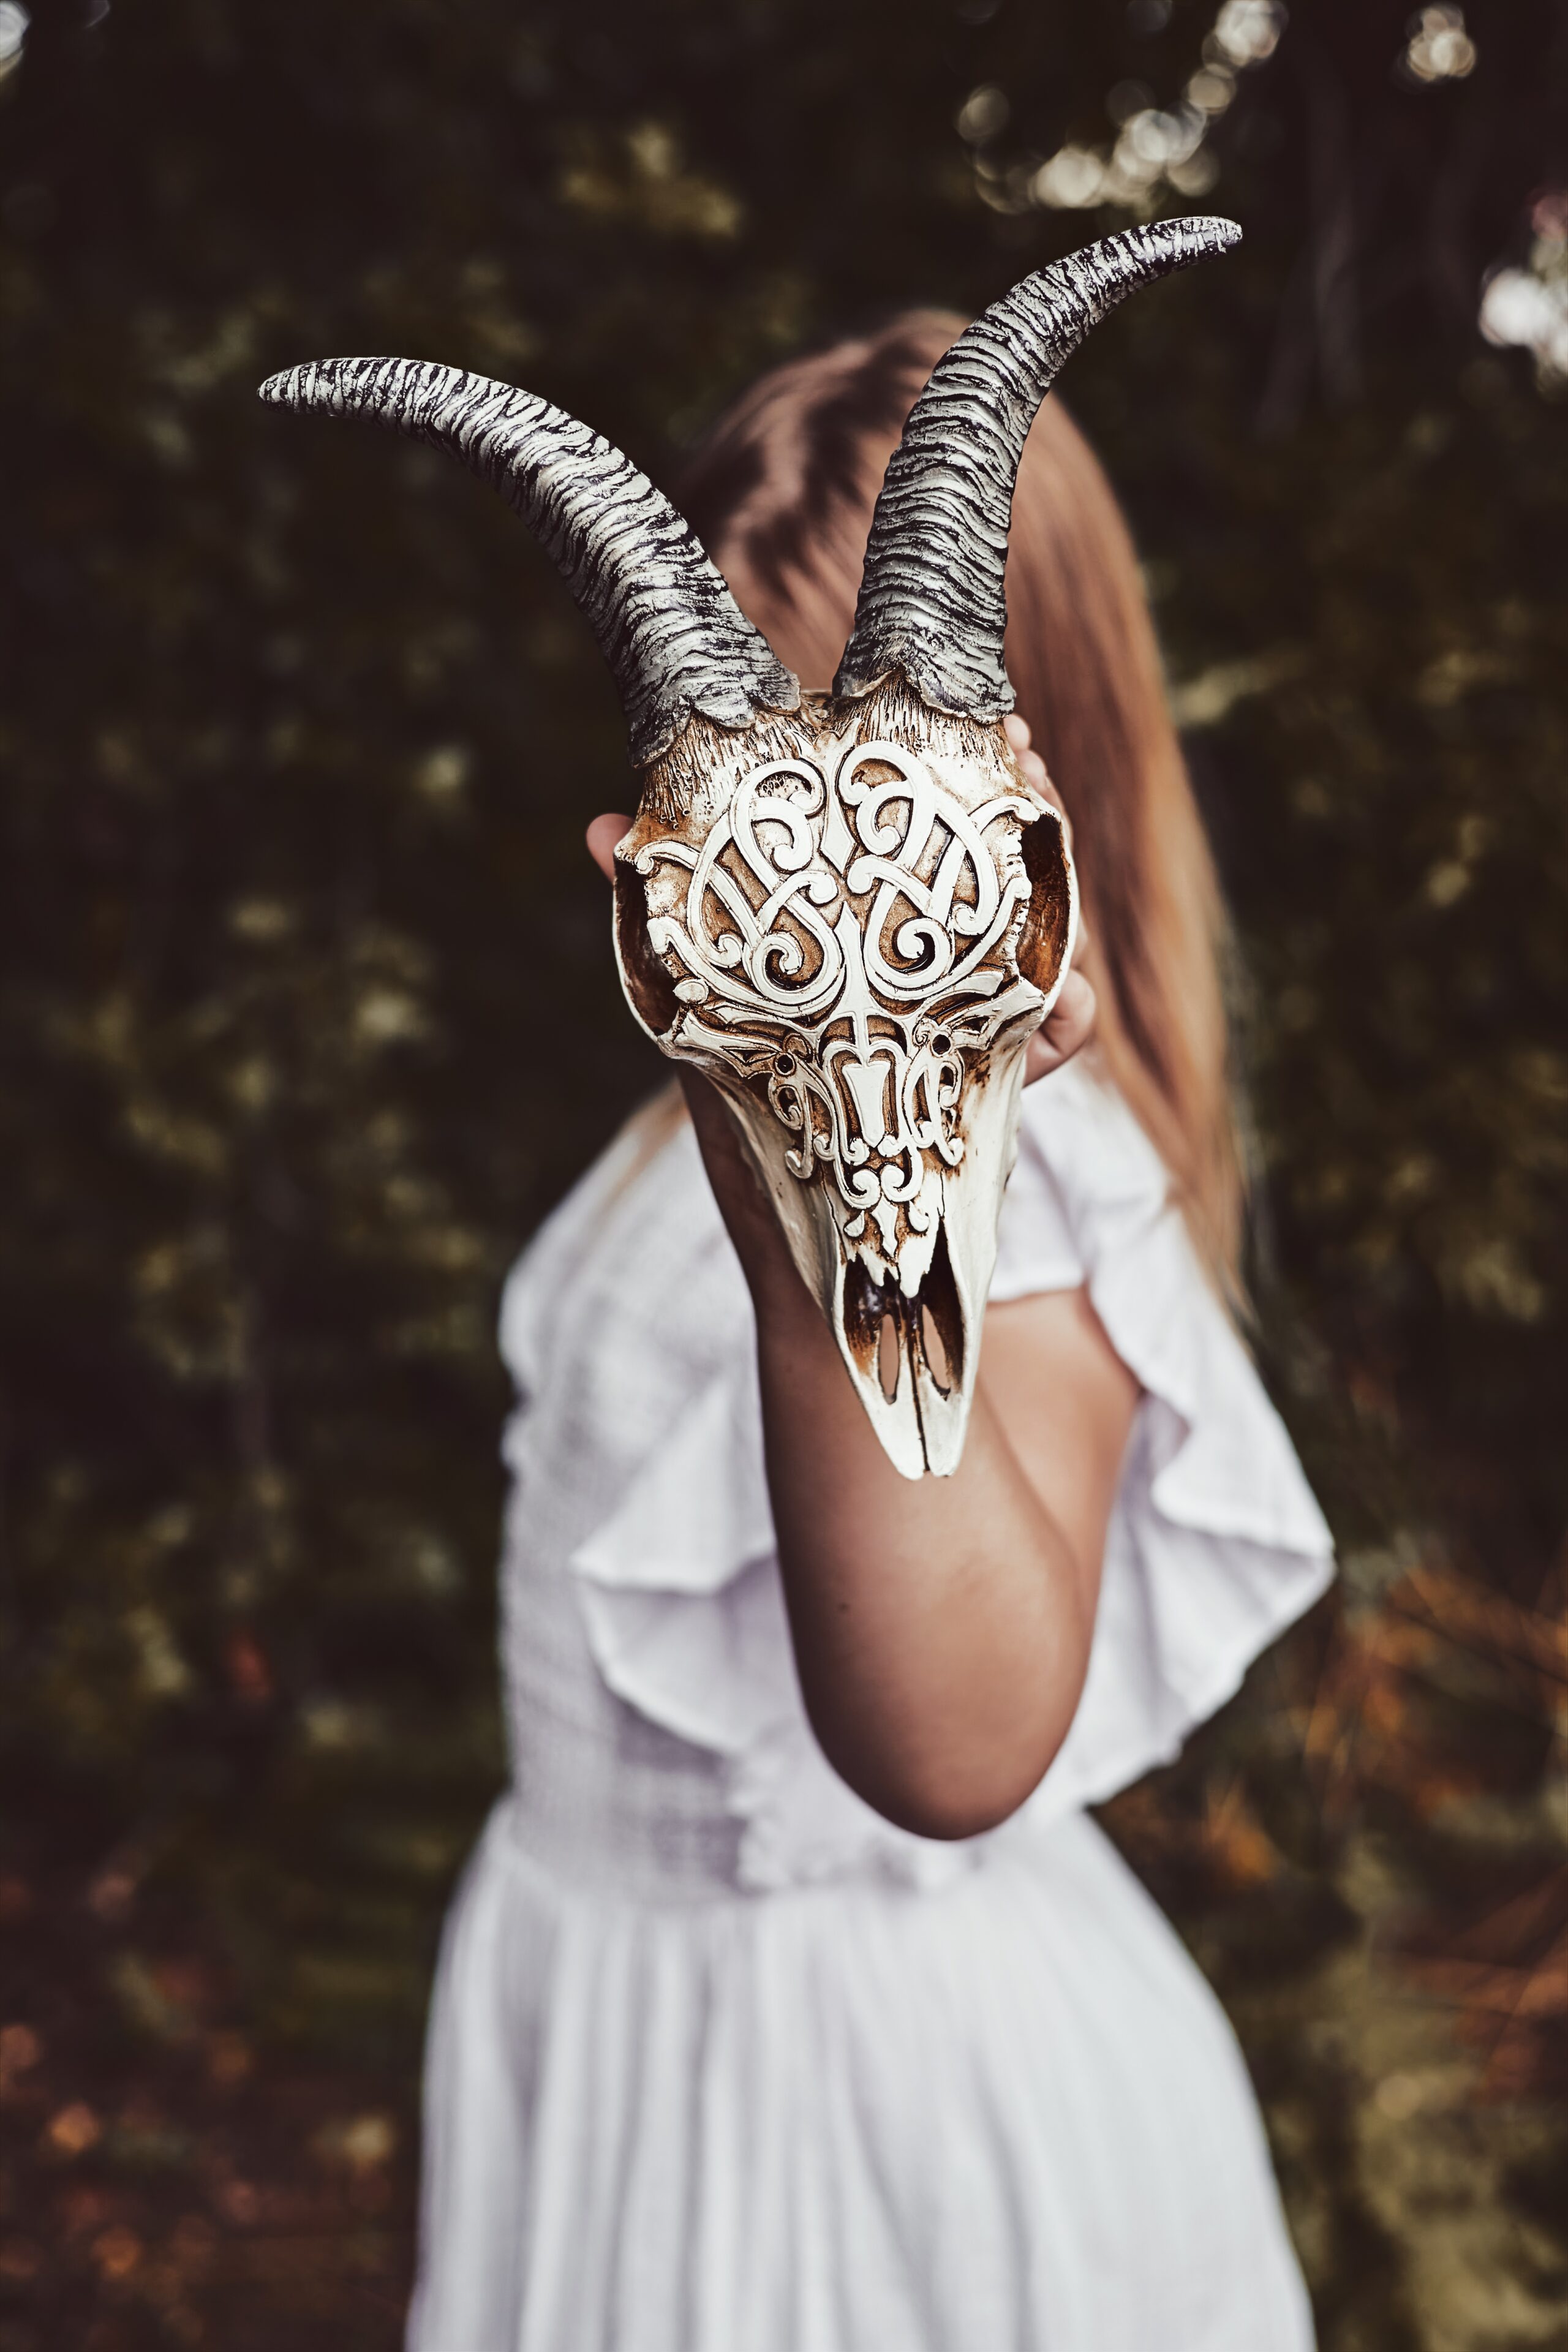 Gothic teenager girl with a goat skull, Youth subculture, Fantasy, Day of the Dead and Halloween